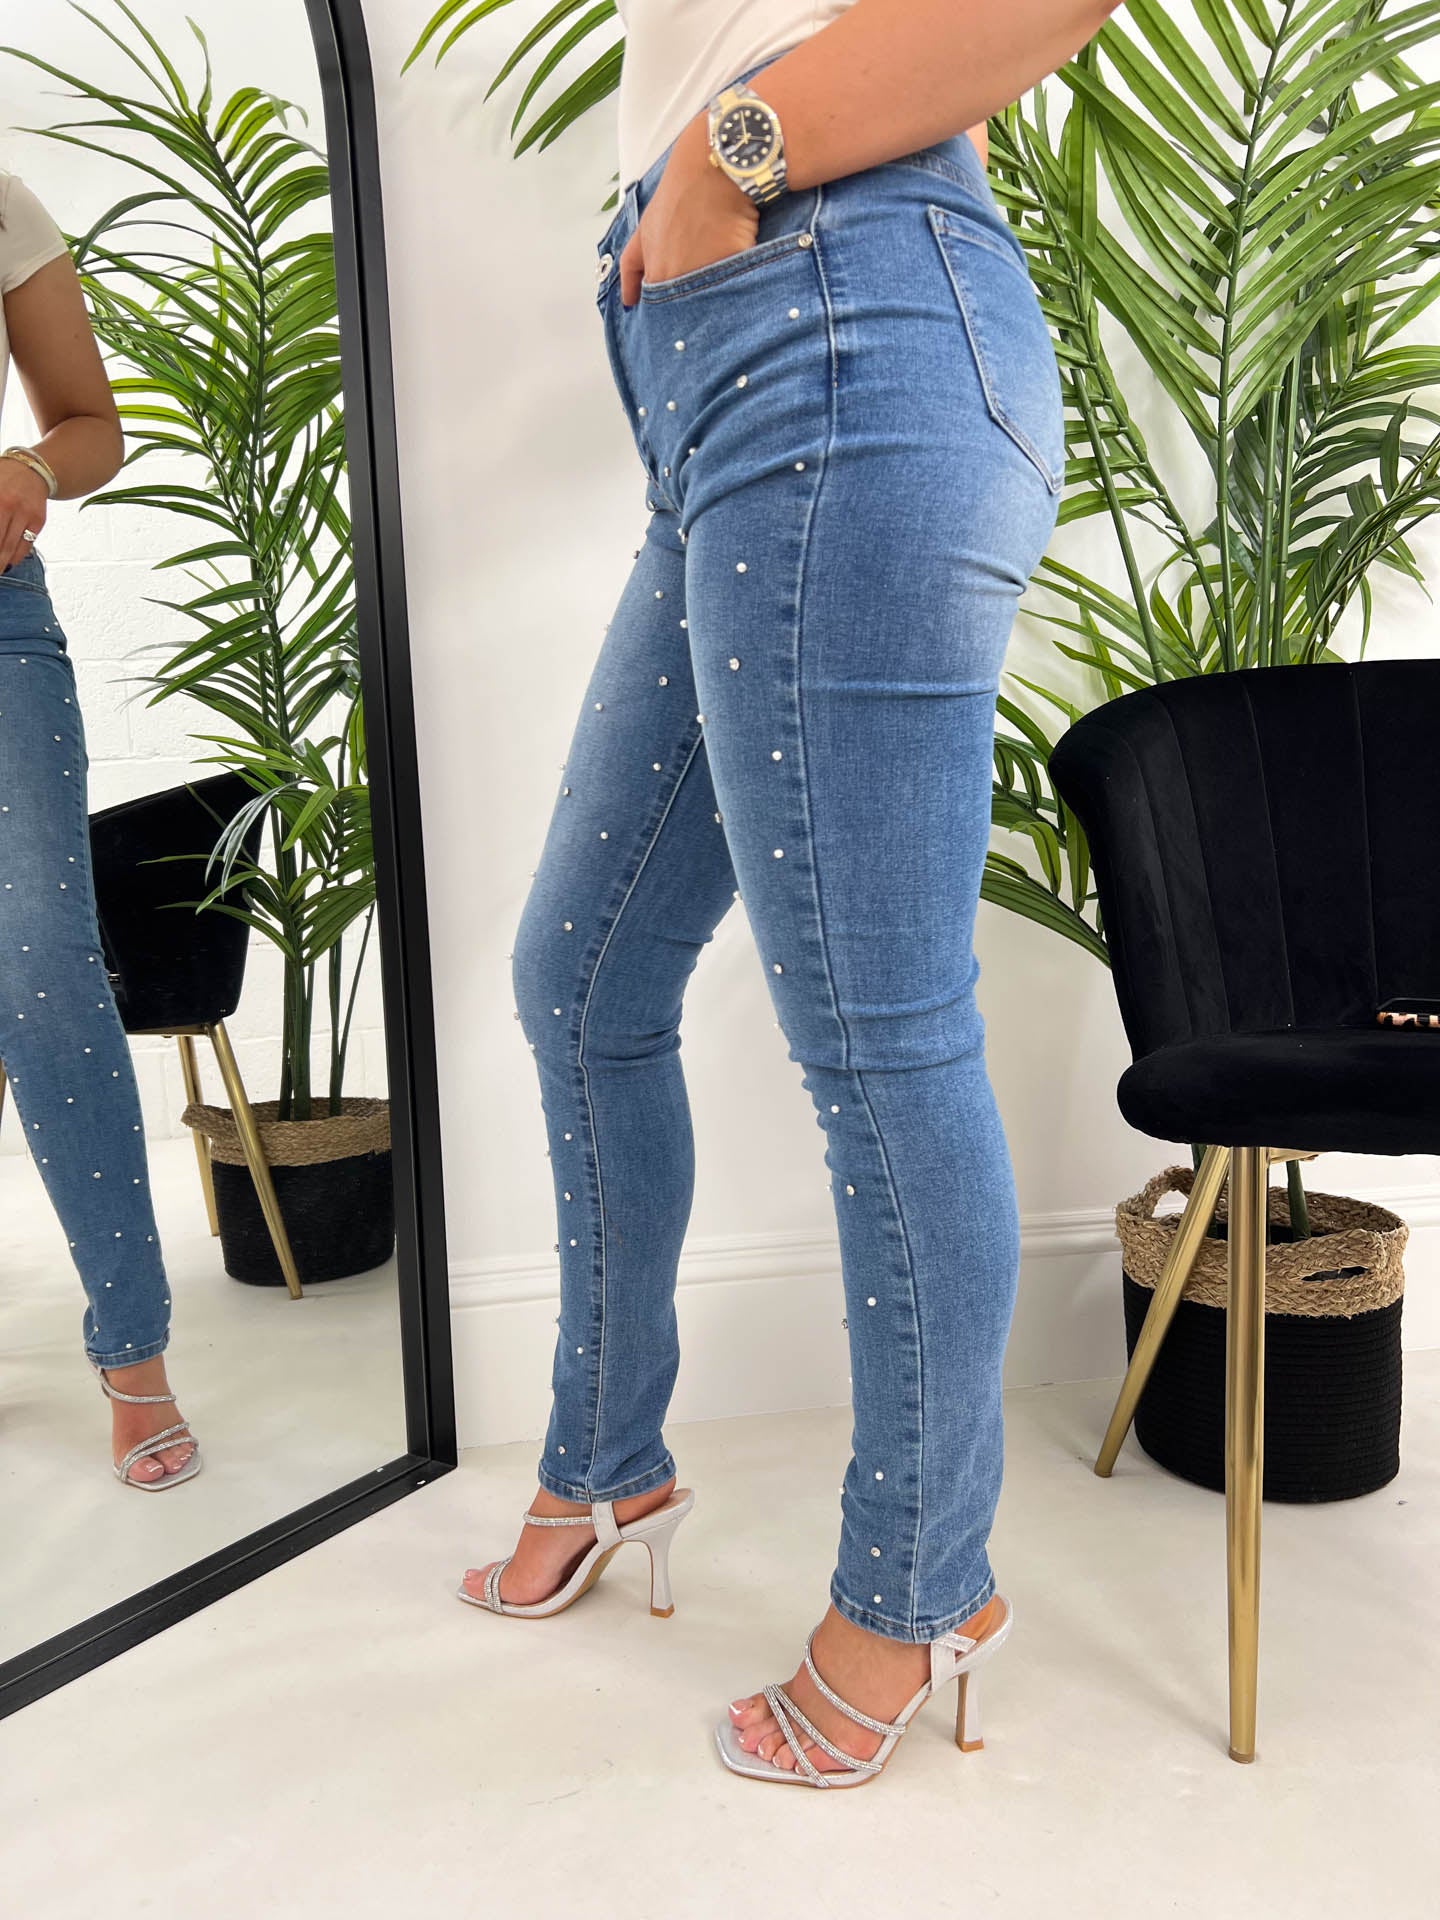 The Chrissy - Bejewelled Skinny Jeans